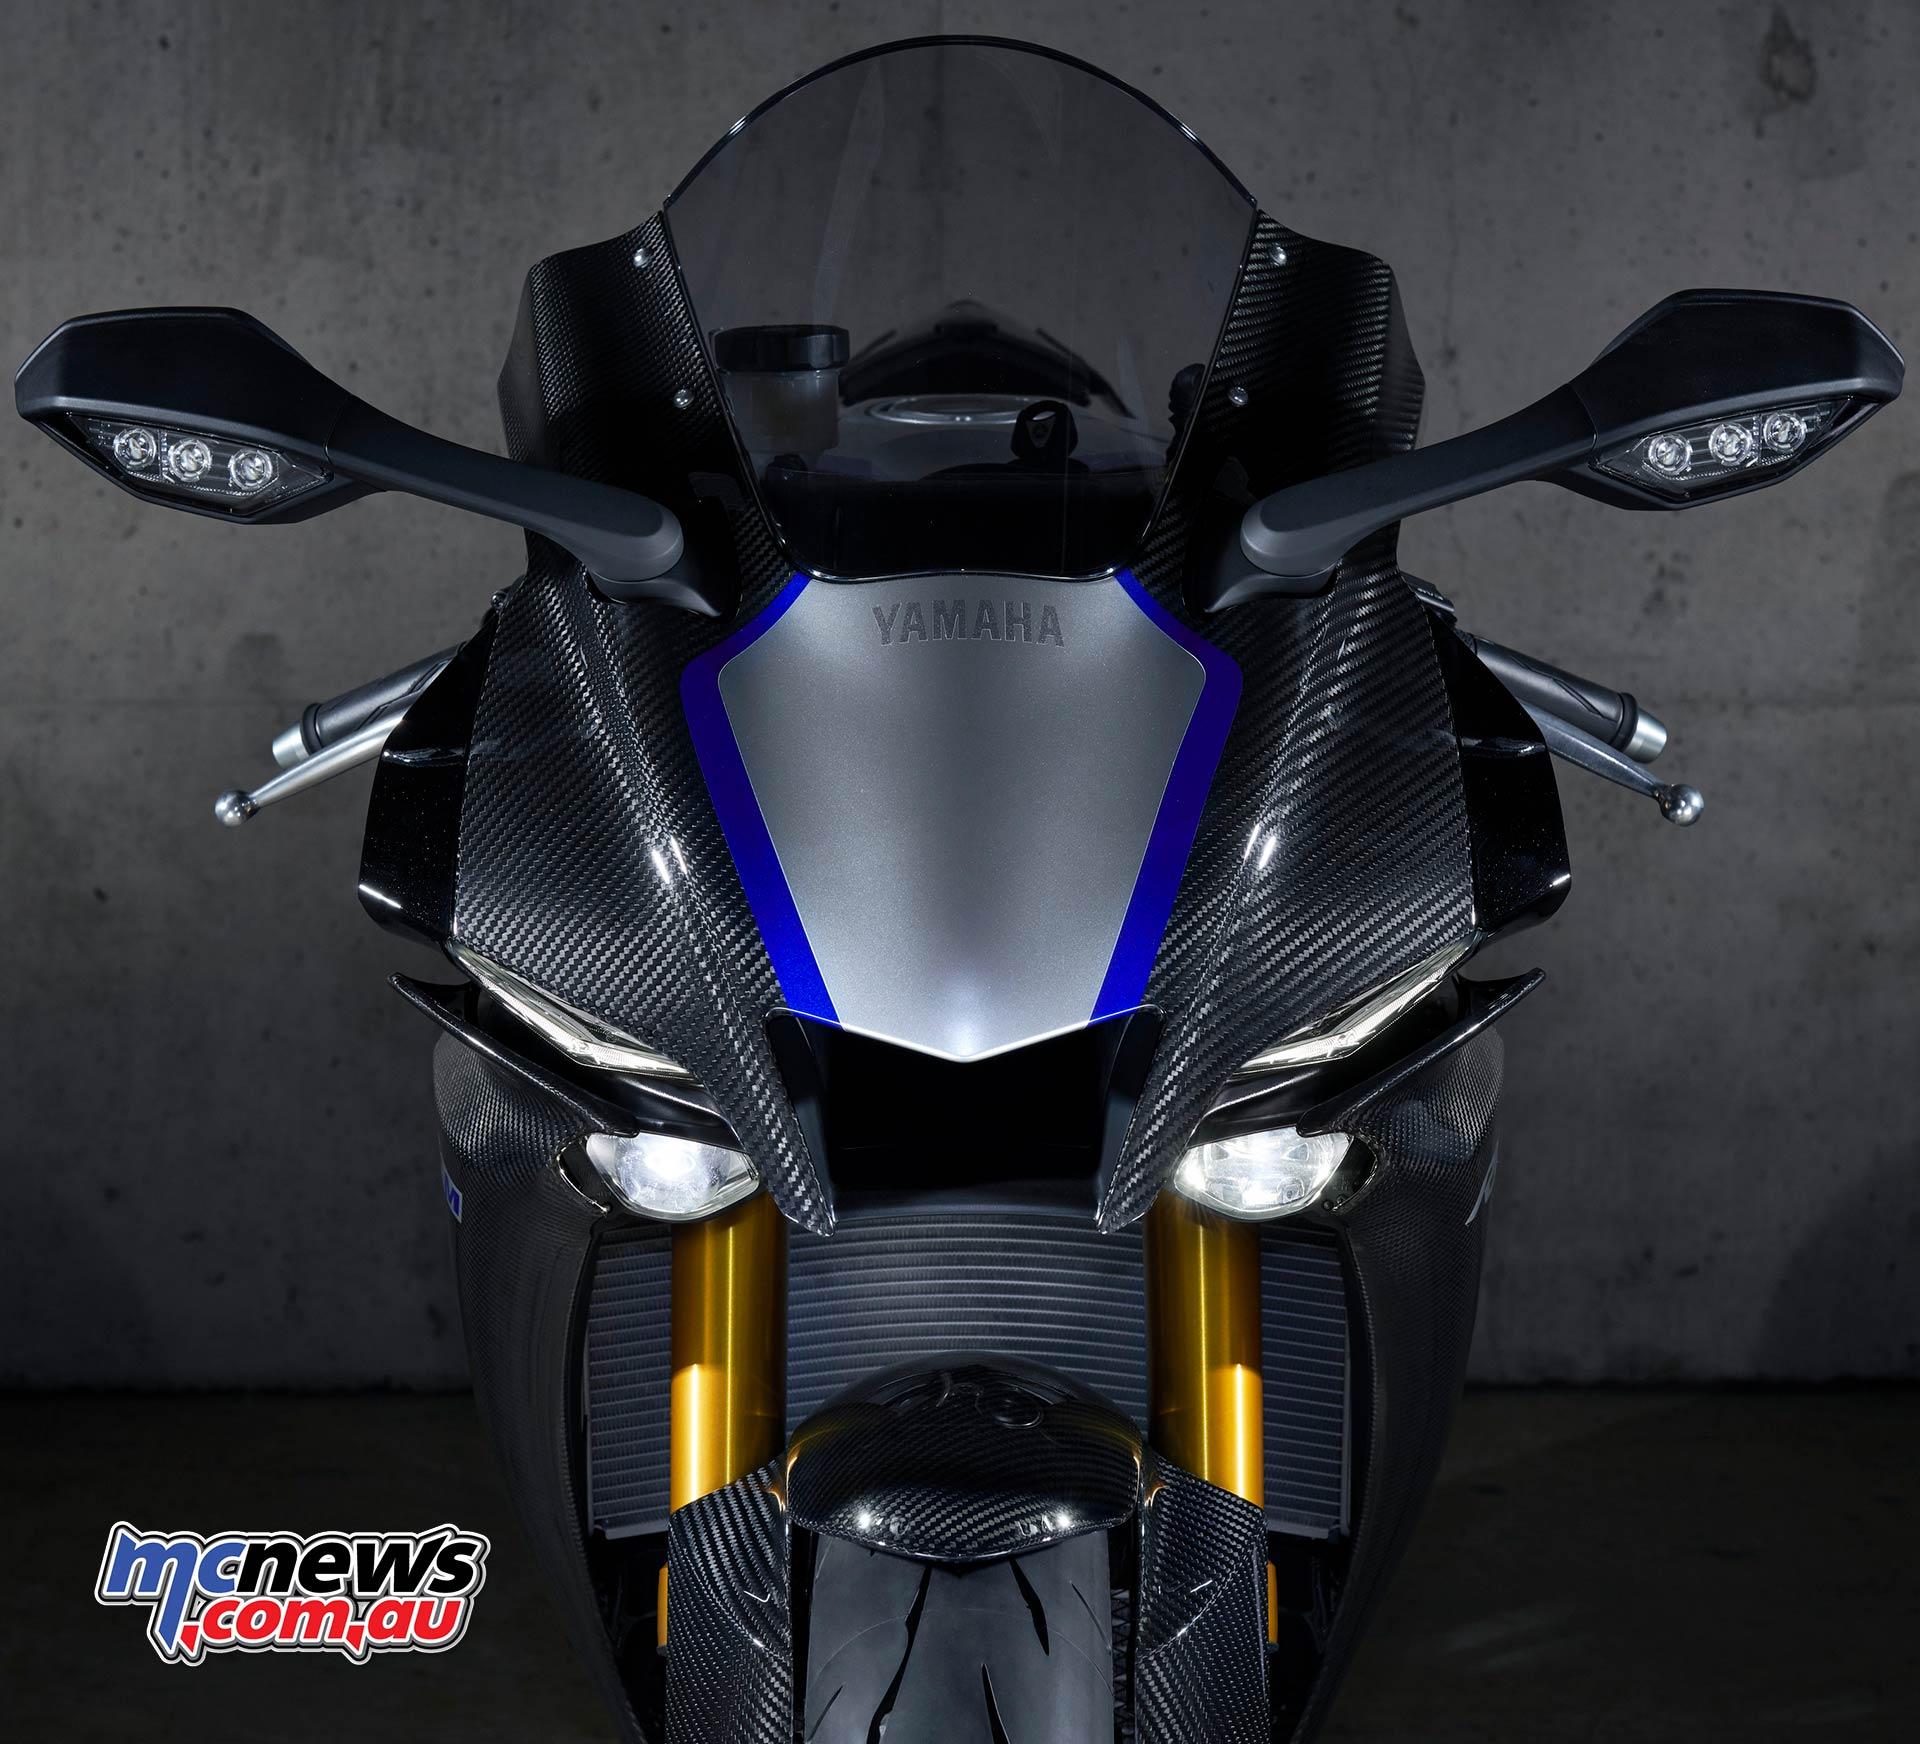 Yamaha YZF R1 And 2020 YZF R1M Here Now. Motorcycle News, Sport And Reviews